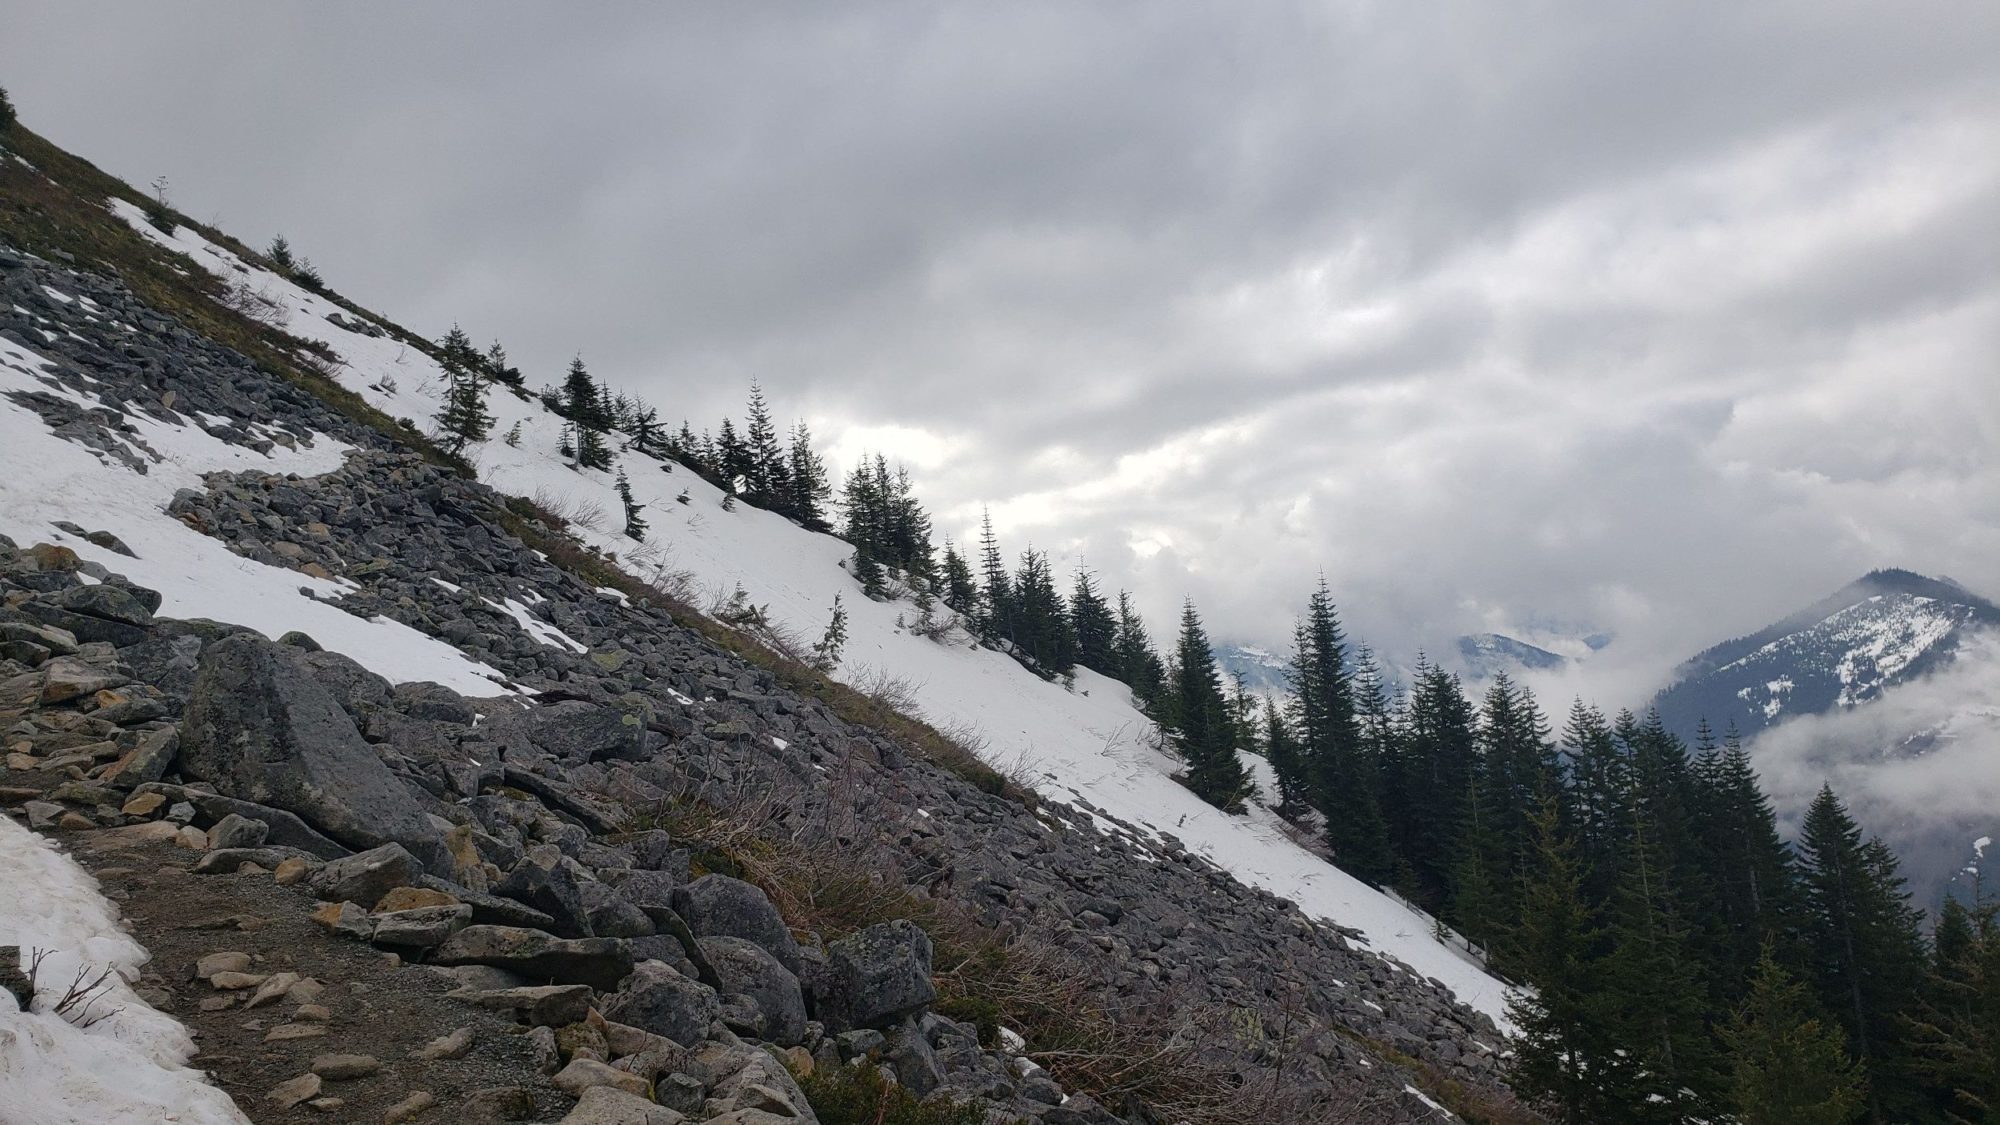 scree along the flank of the mountain